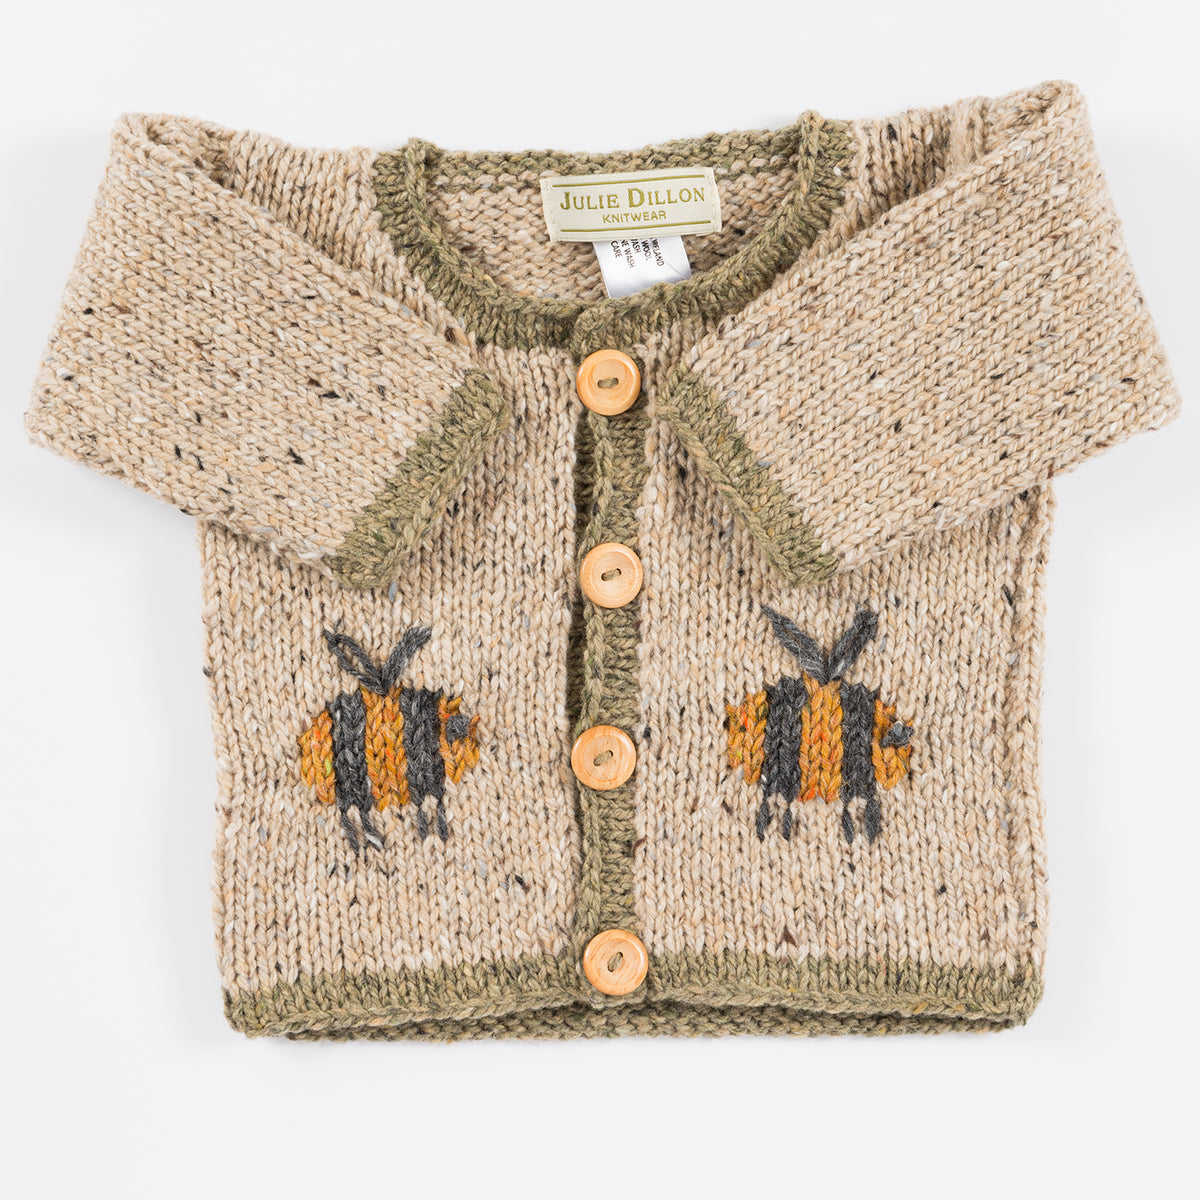 Handknitted Baby Cardigan - Beige with Bumble Bee motif